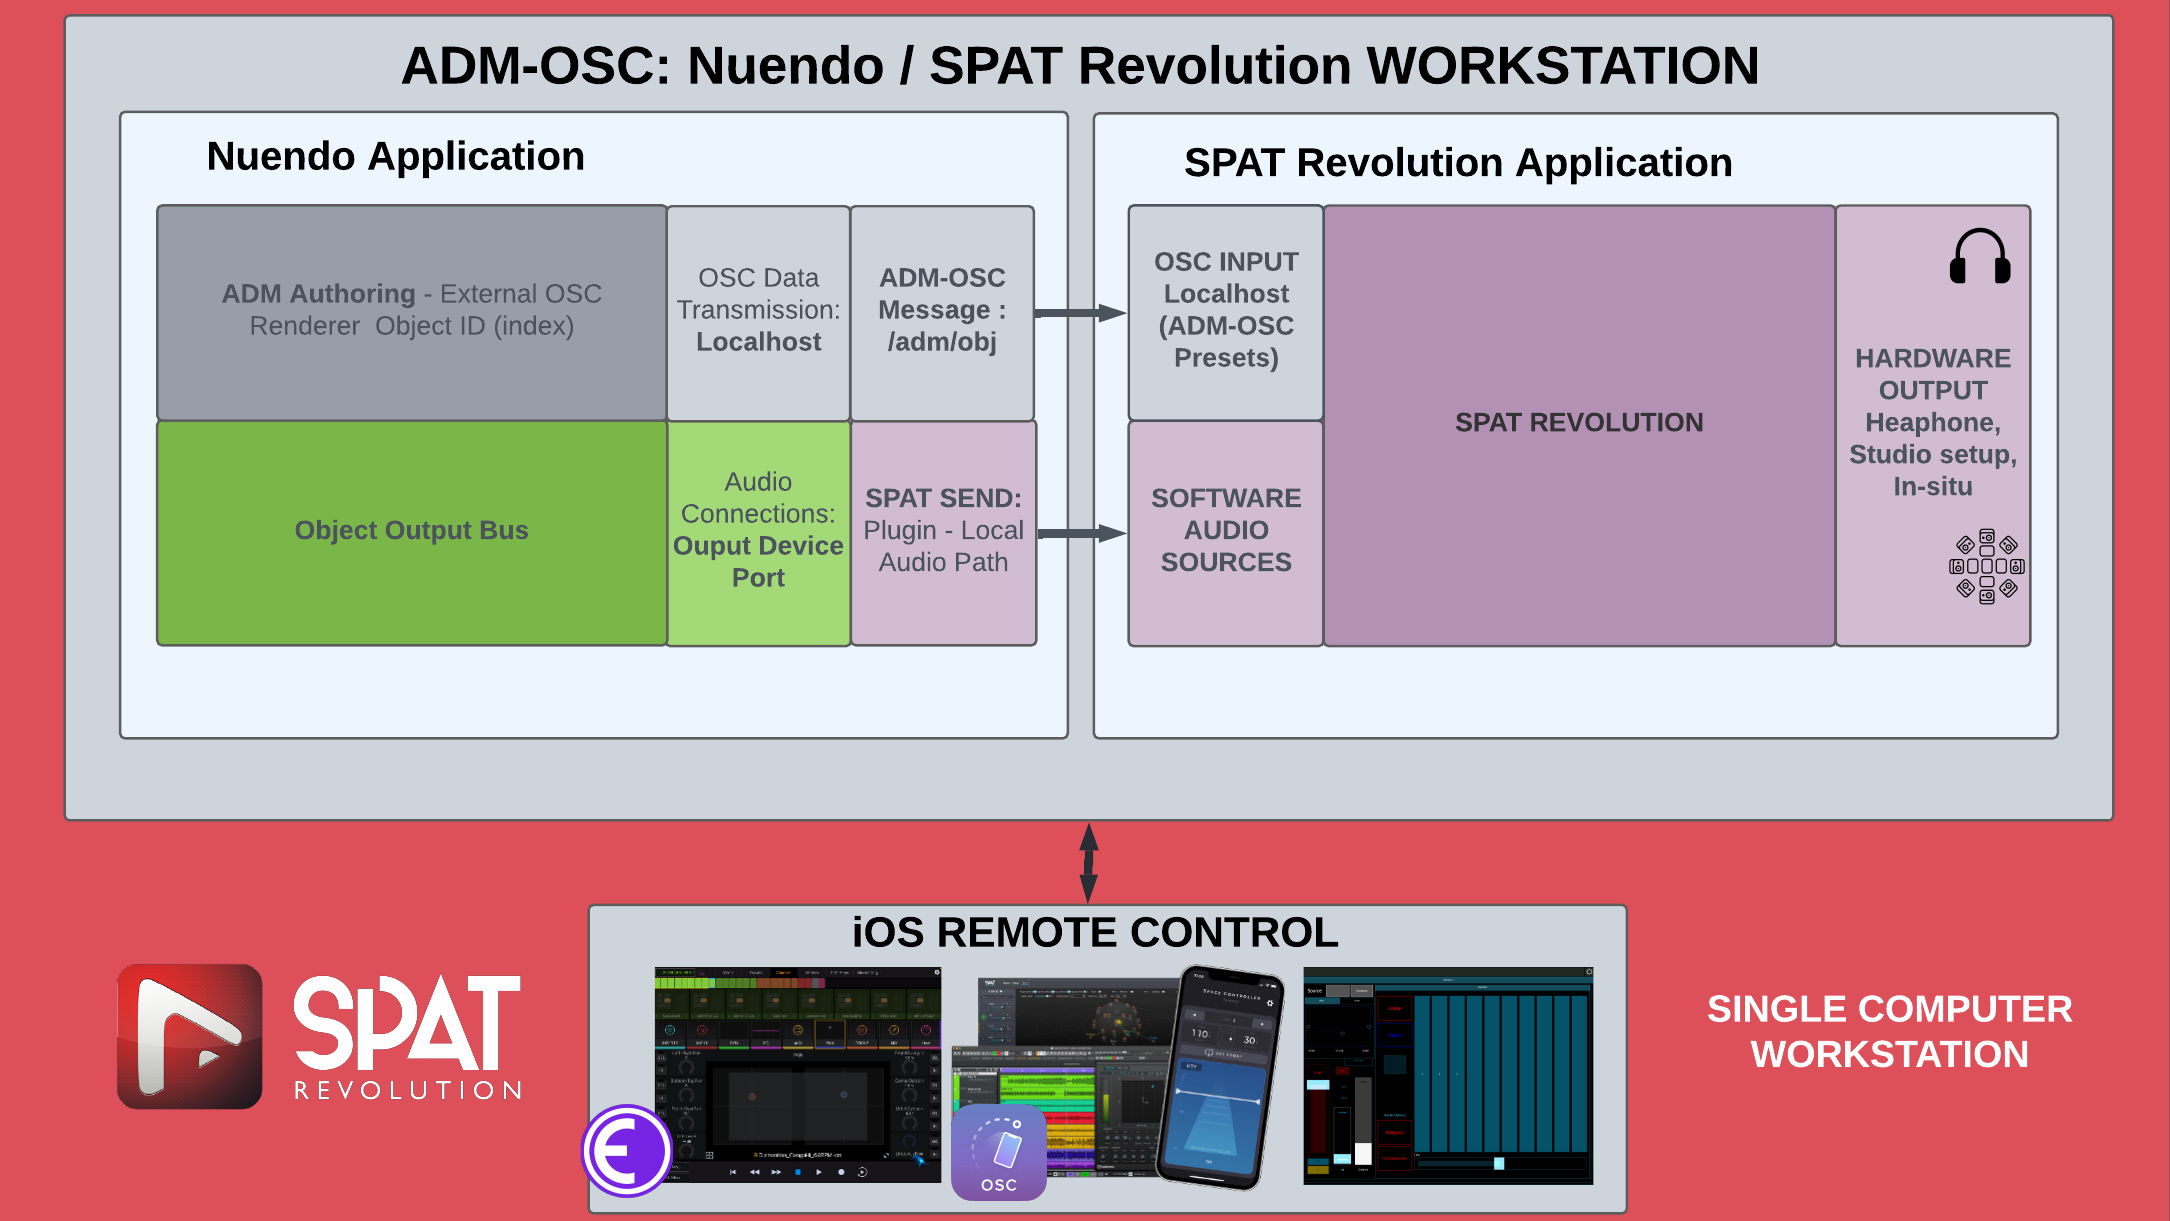 System schematics - Nuendo and SPAT Revolution - Software In / Hardware Out